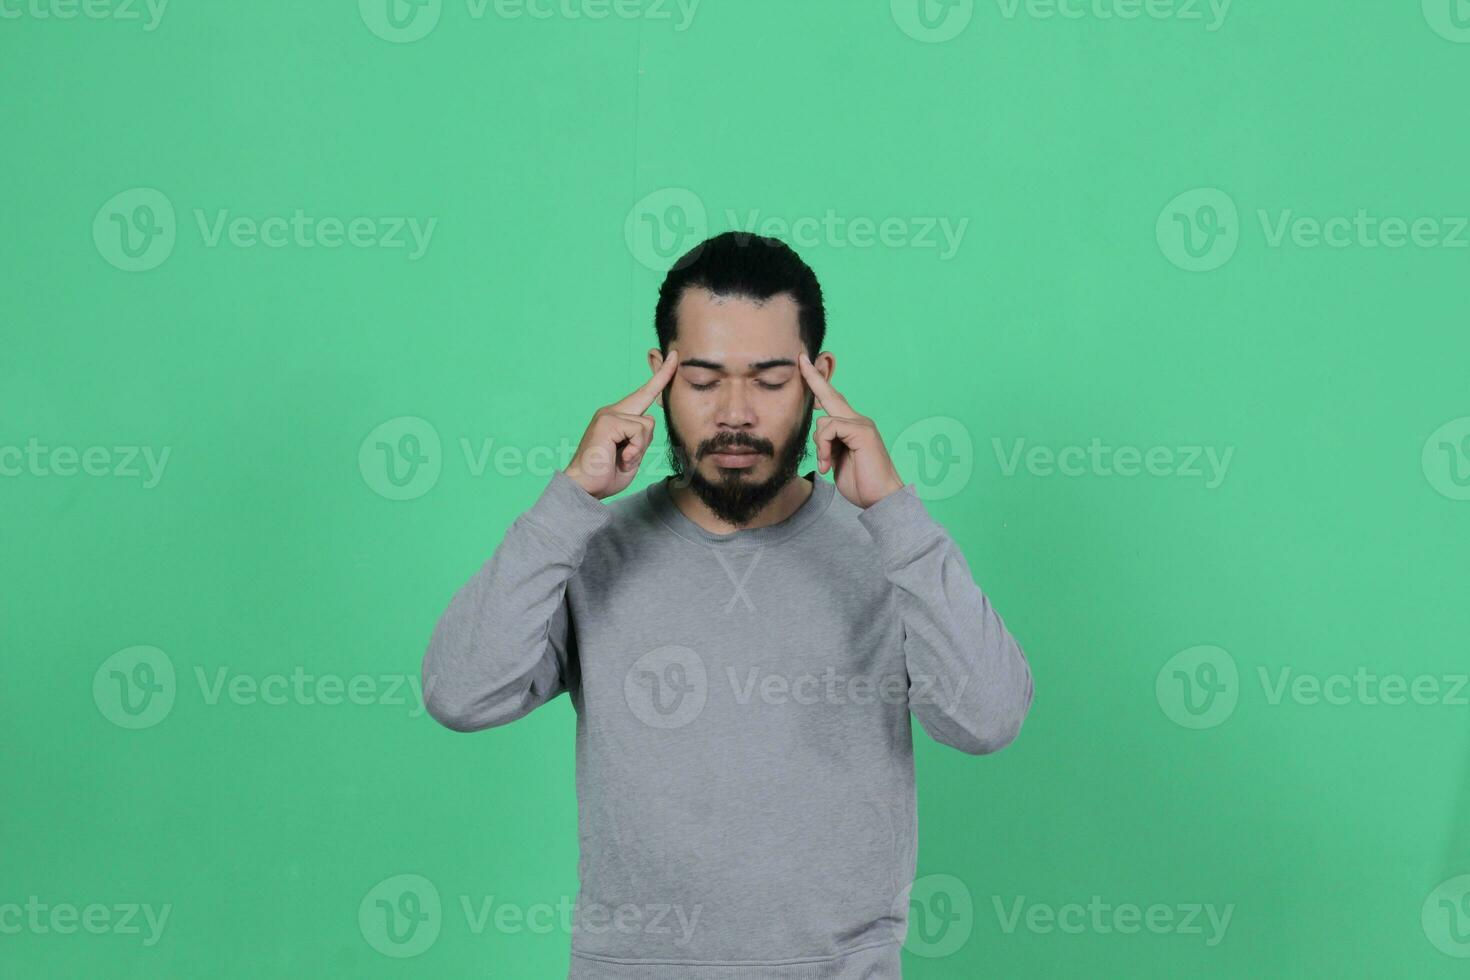 bearded asian man poses wearing a gray shirt against a green background photo